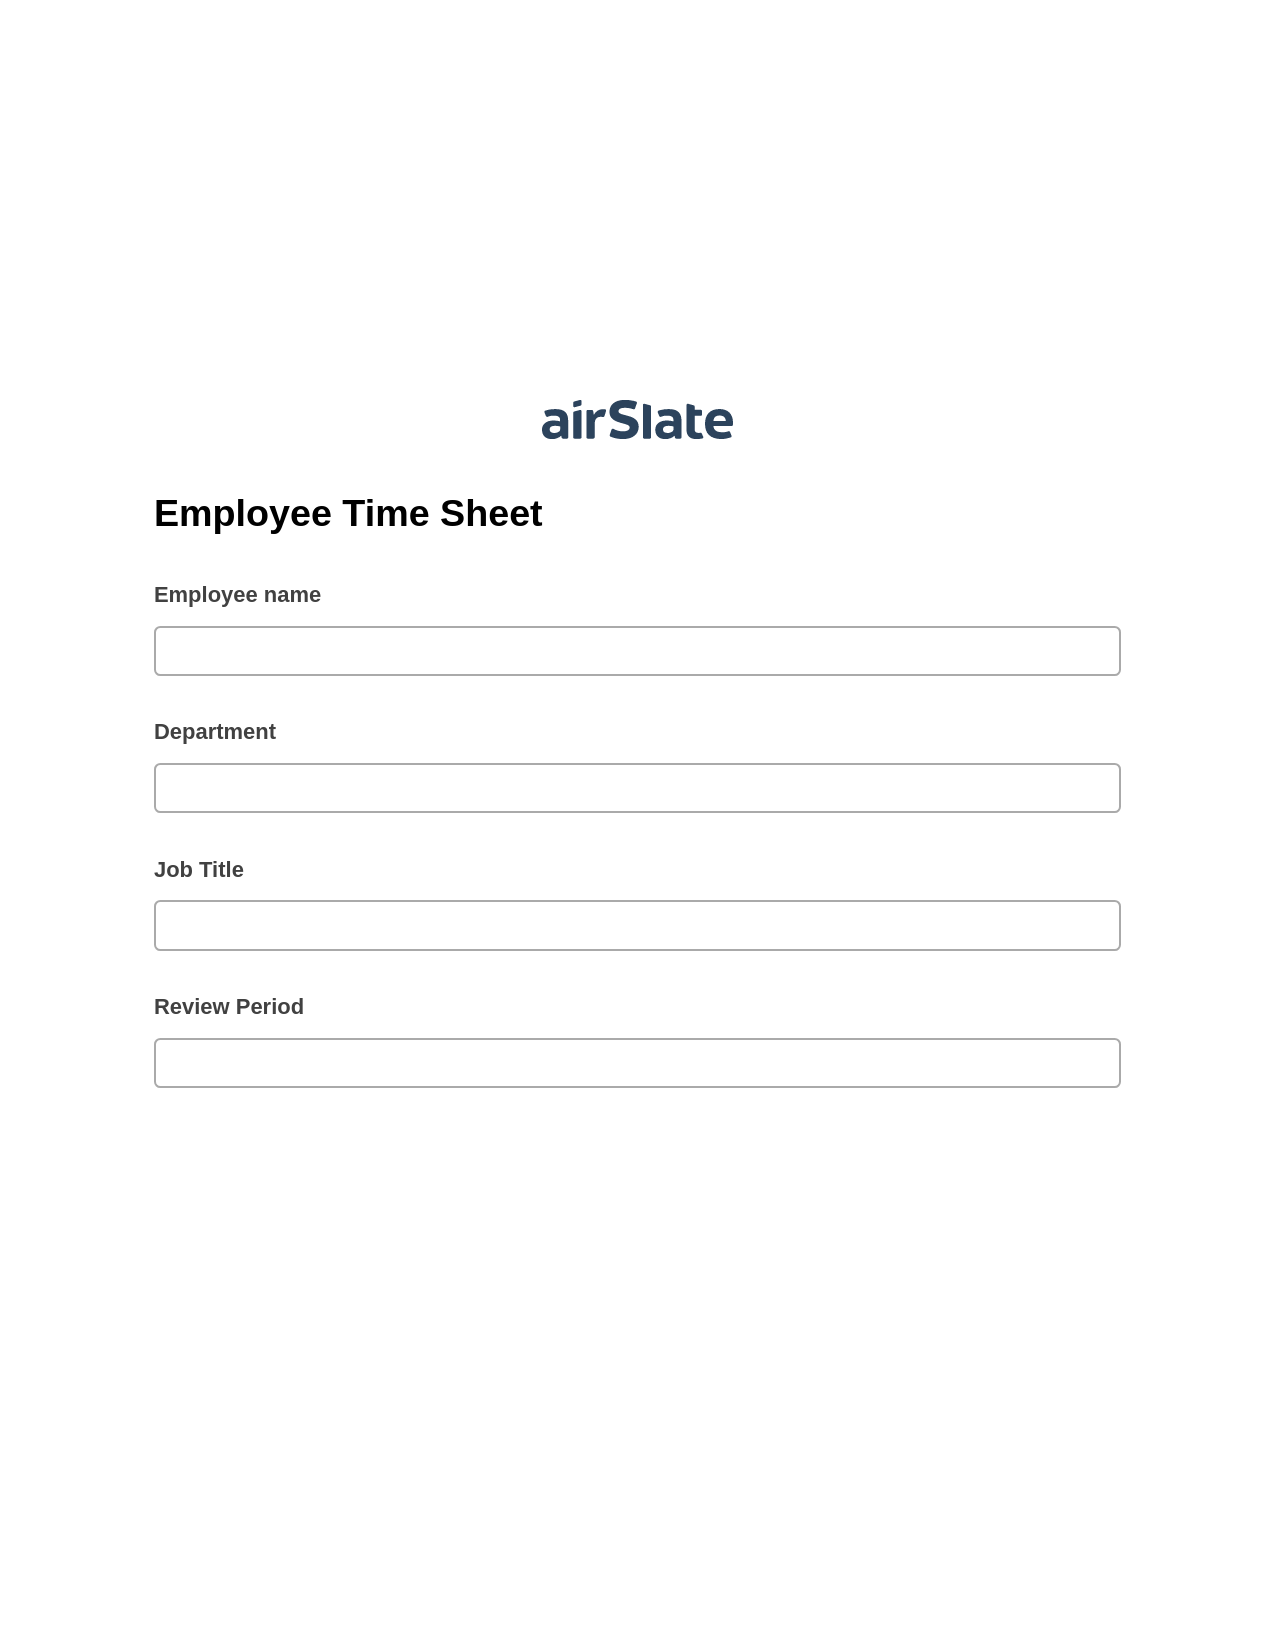 Employee Time Sheet Pre-fill Dropdowns from MySQL Bot, Invoke Salesforce Process Bot, Export to Excel 365 Bot